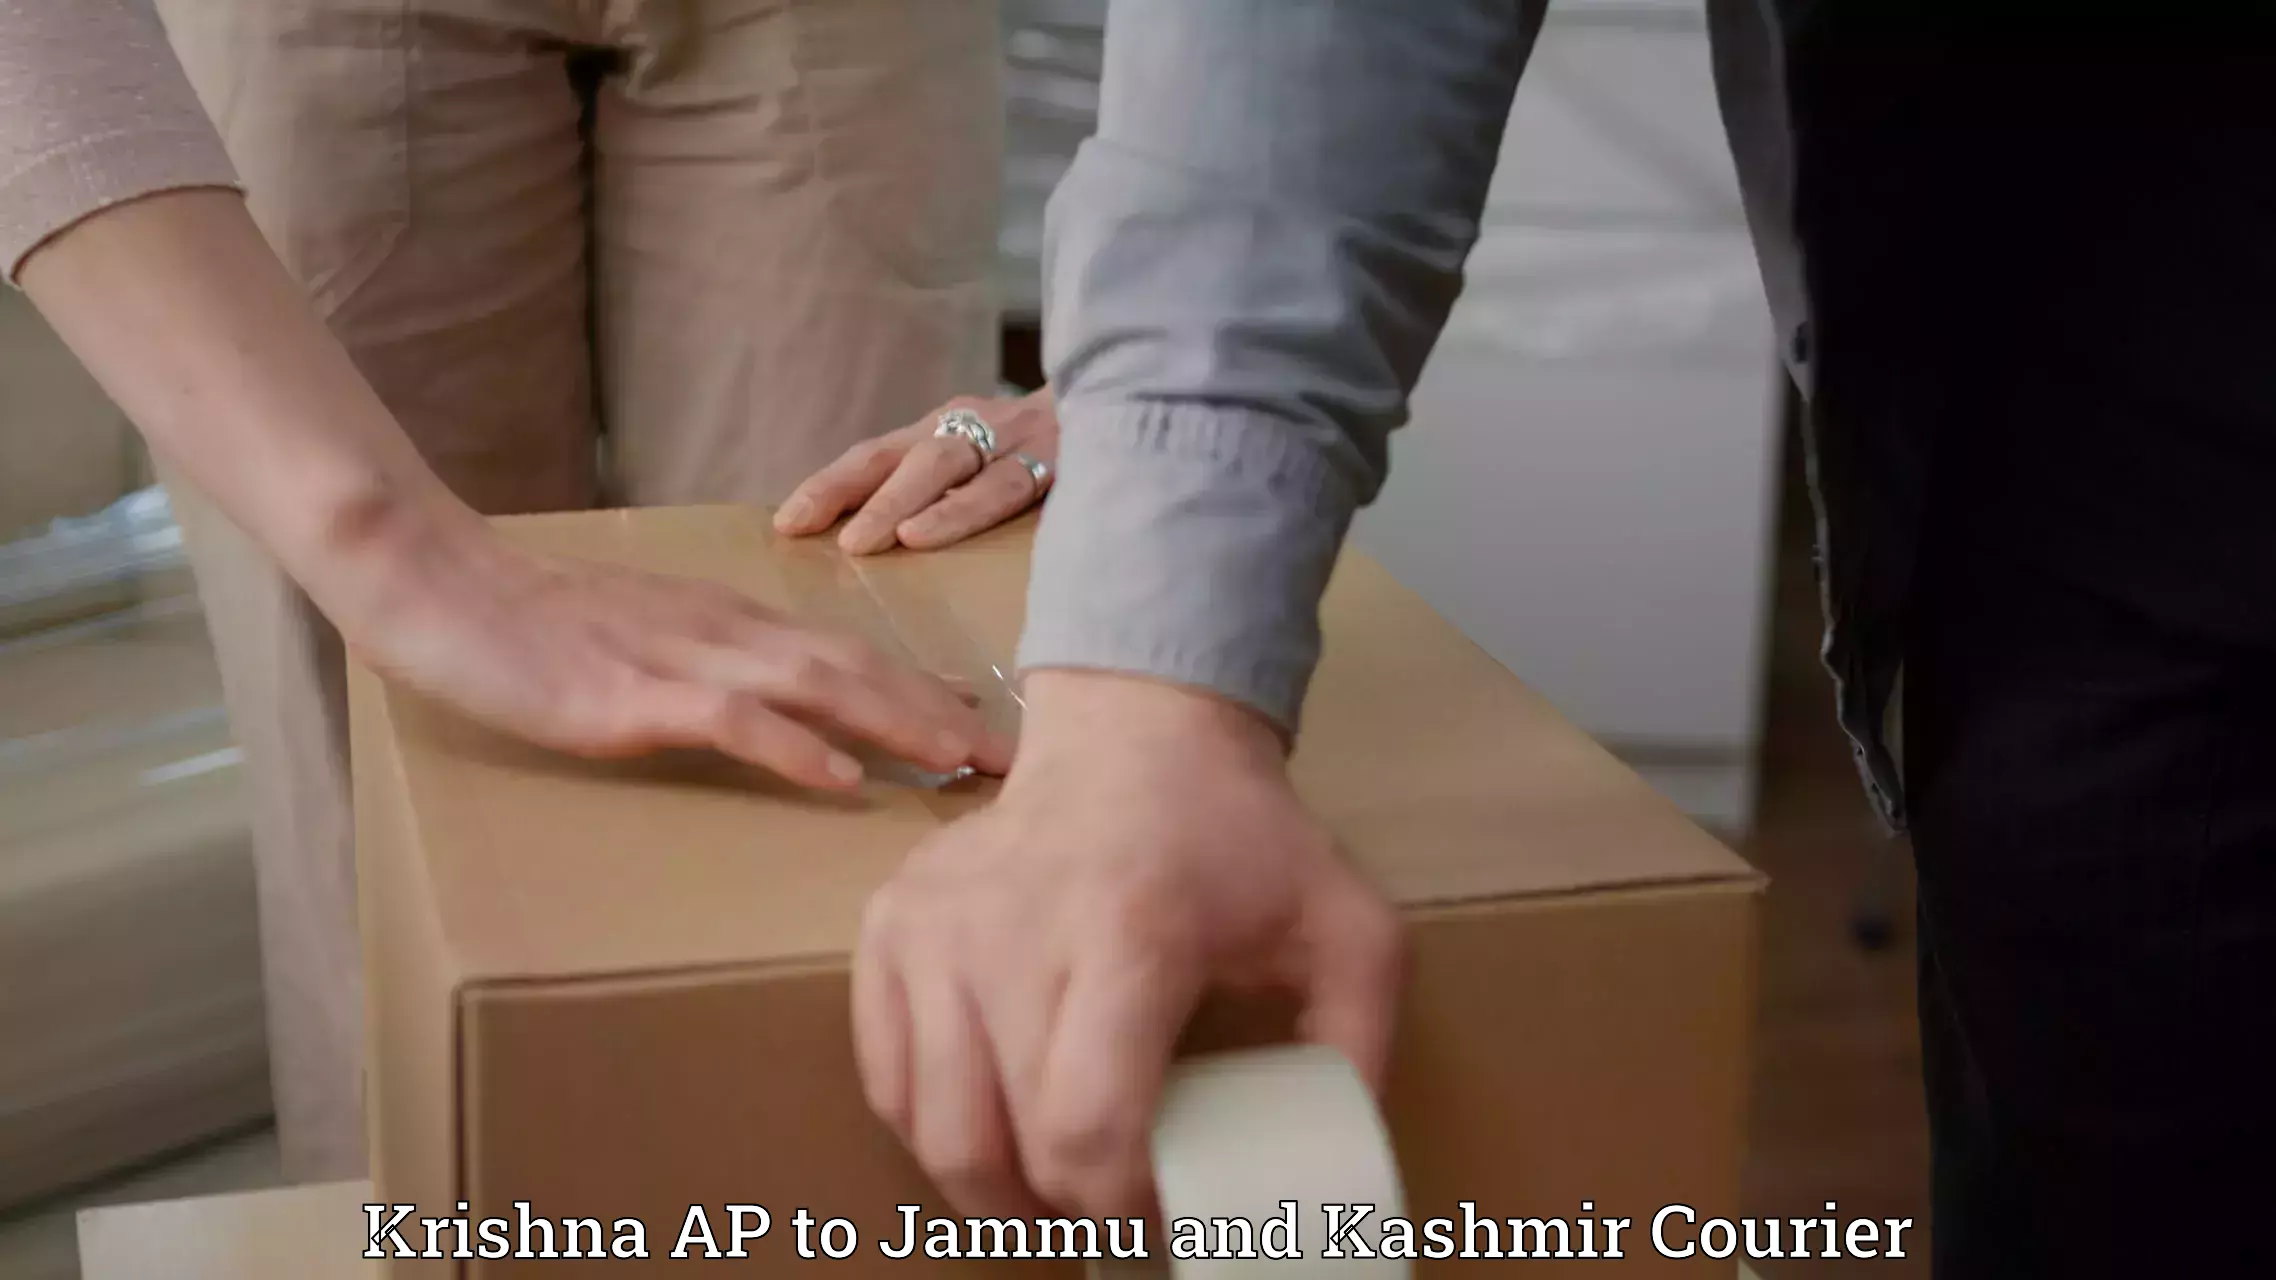 Express delivery network Krishna AP to Jammu and Kashmir